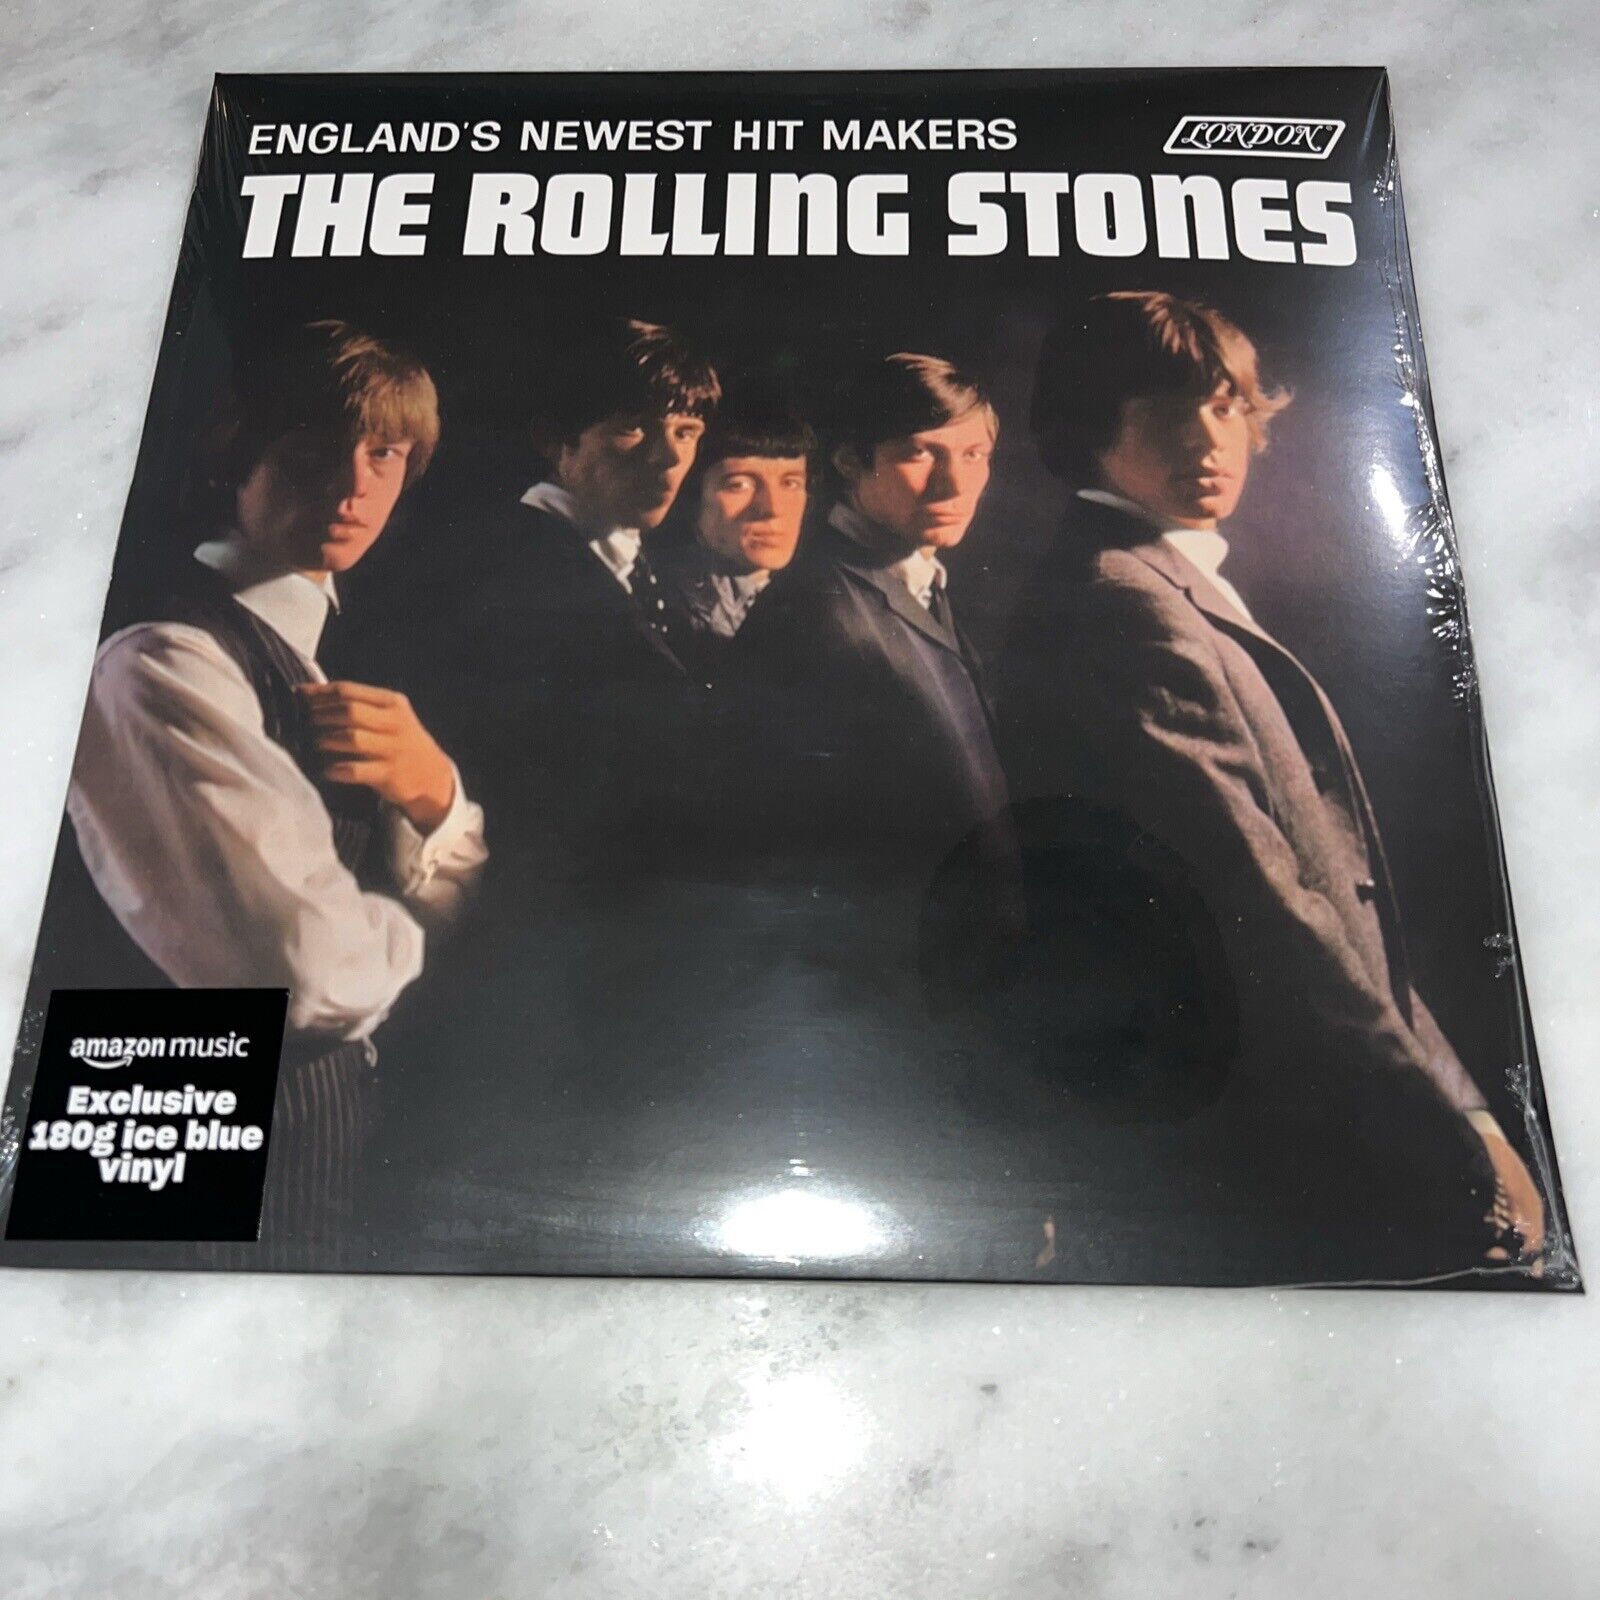 The Rolling Stones - England's Newest Hit Makers Teal Vinyl LP New Sealed Mono